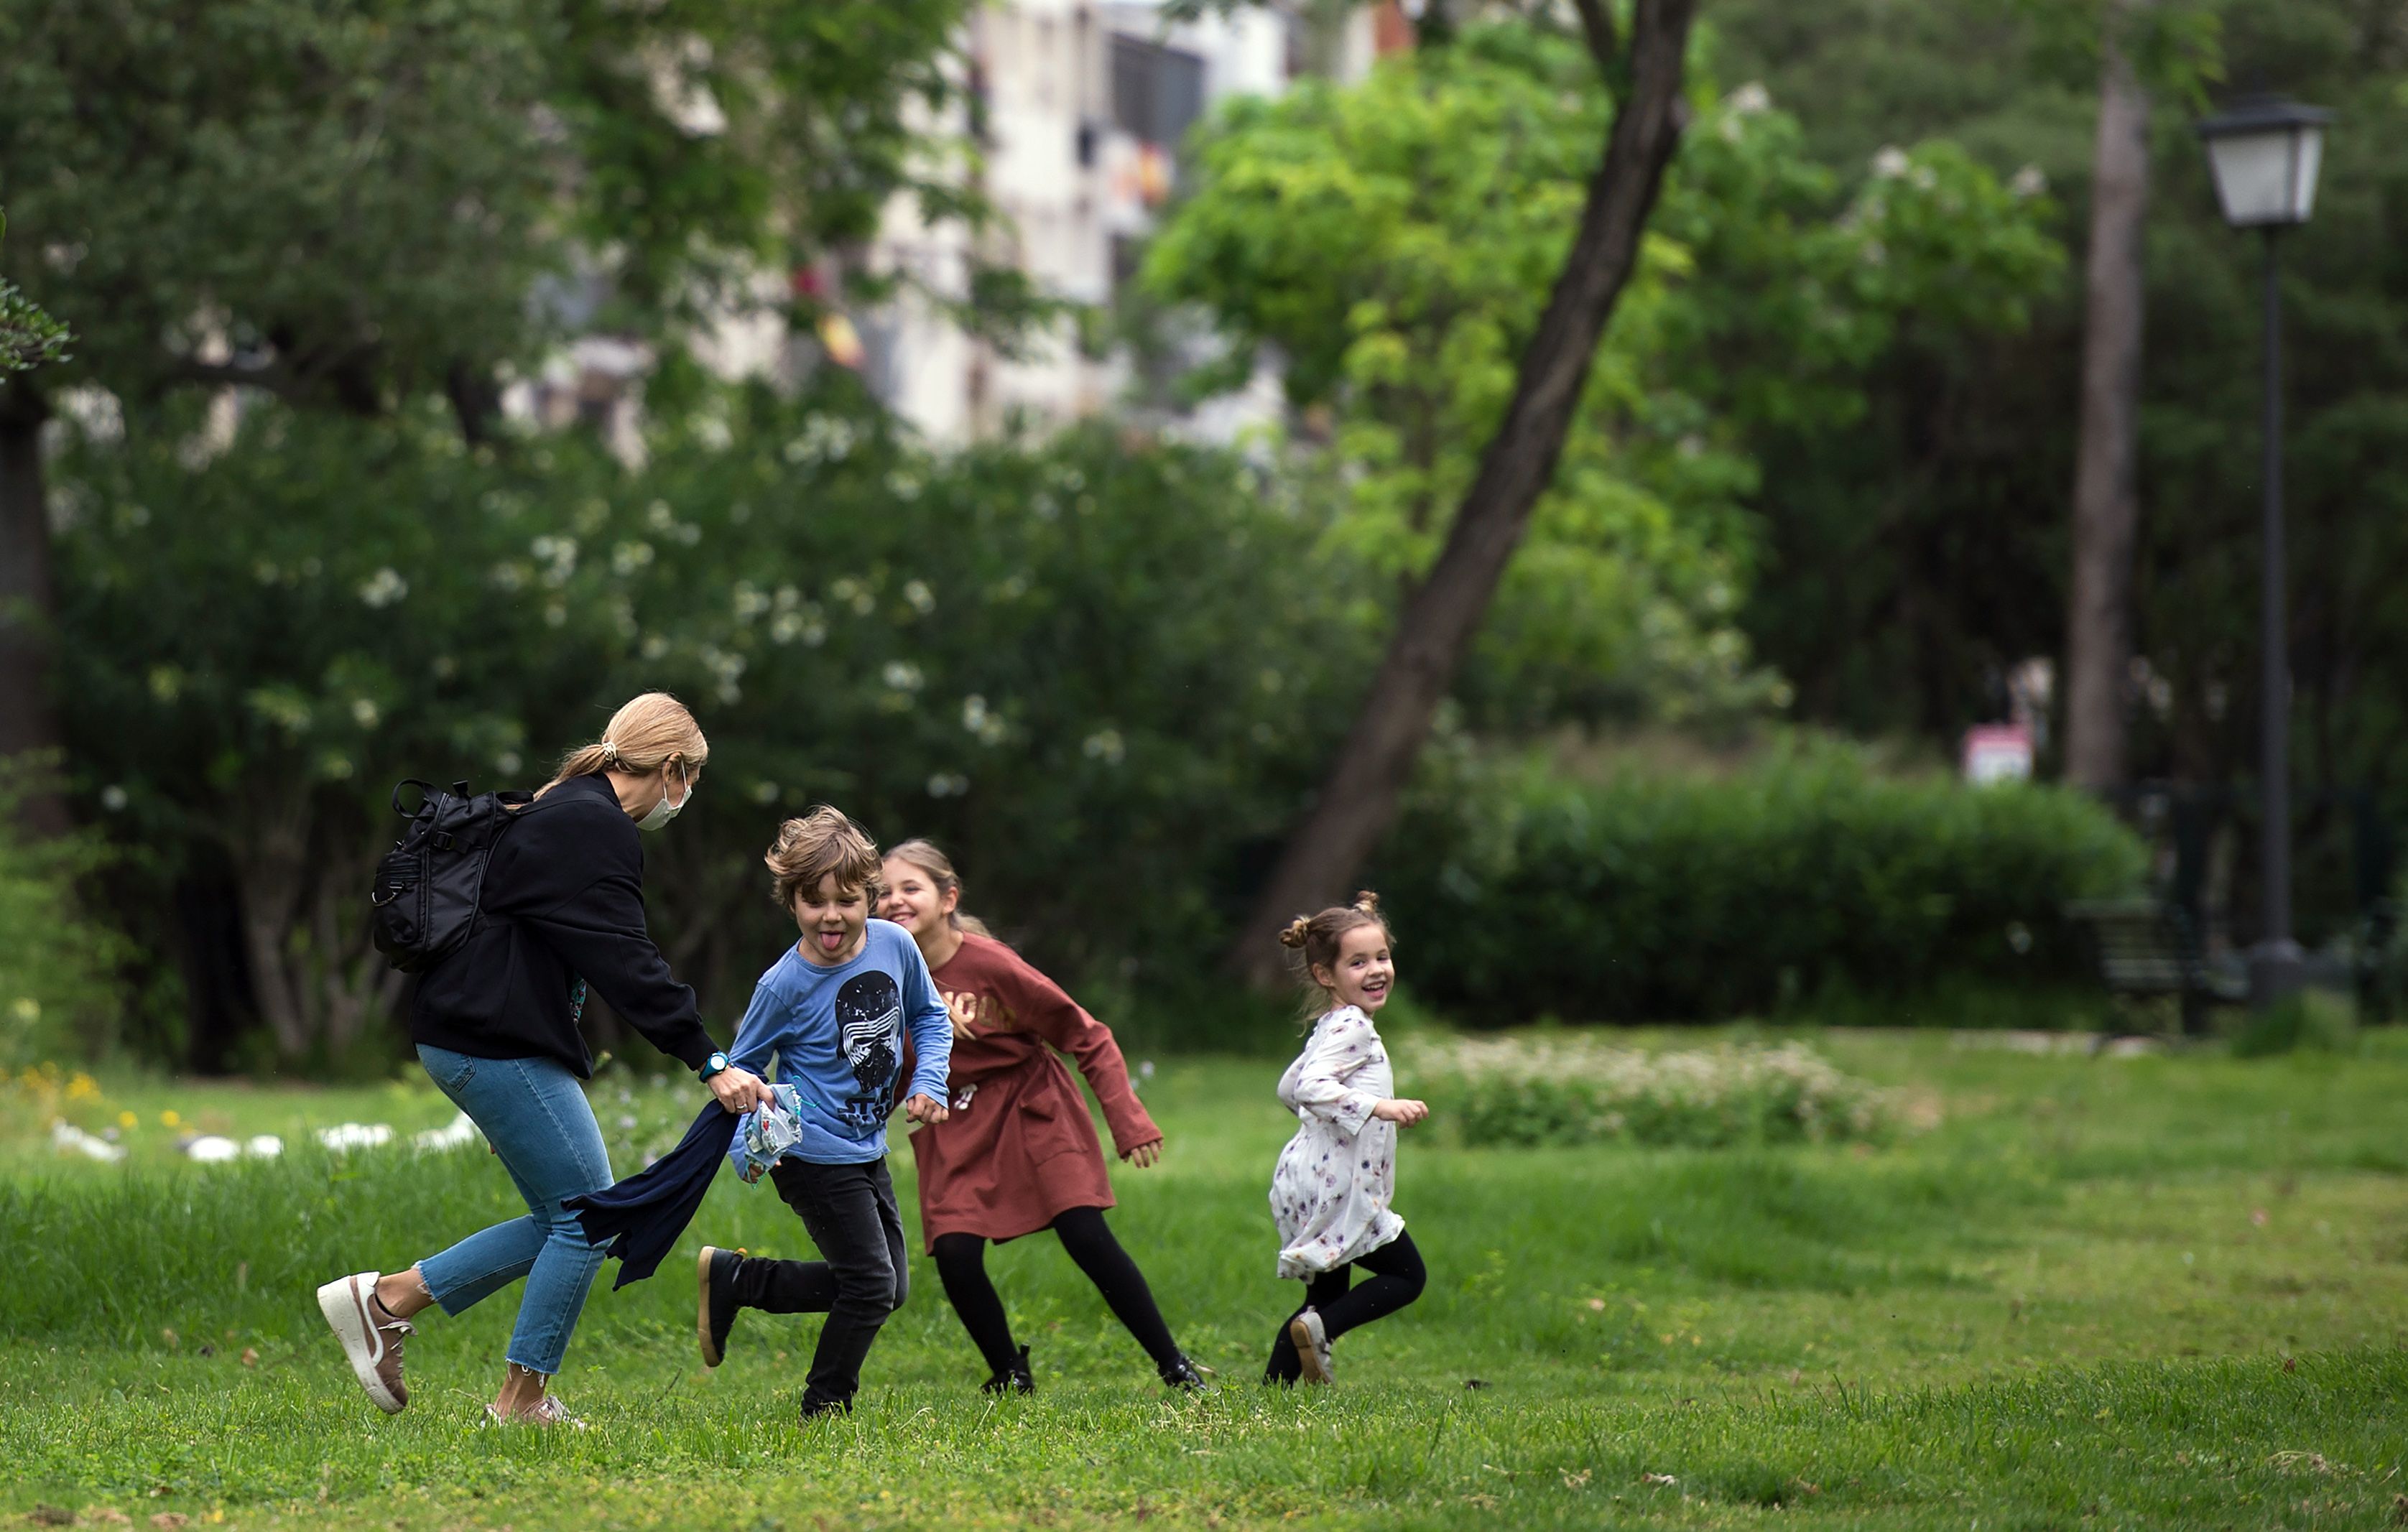 In this image, a woman plays tag with kids in a park